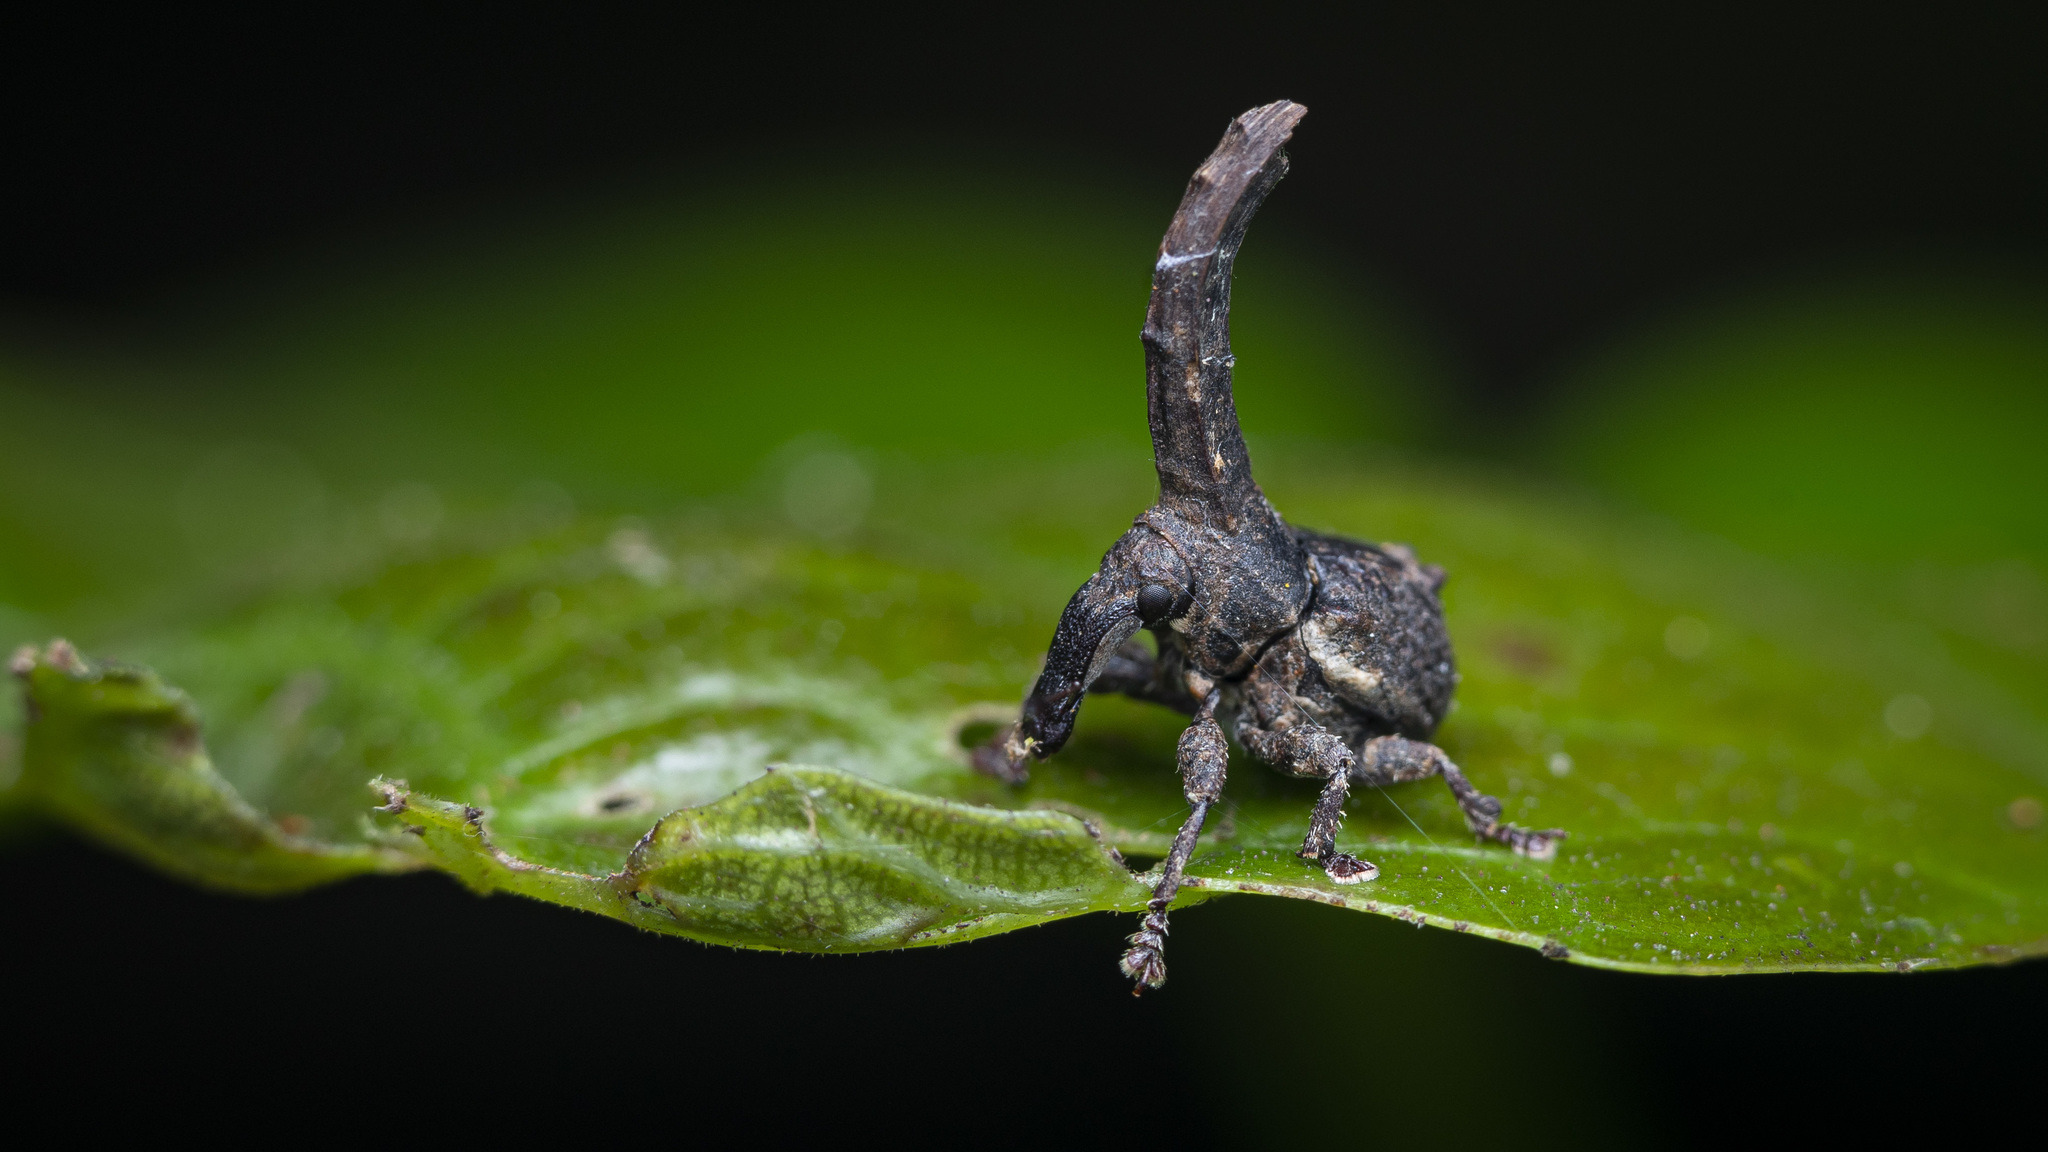 Ok here me out Horn-headed weevil as a mini-boss/upper yard weevil,  Cerocranus extremus : r/GroundedGame